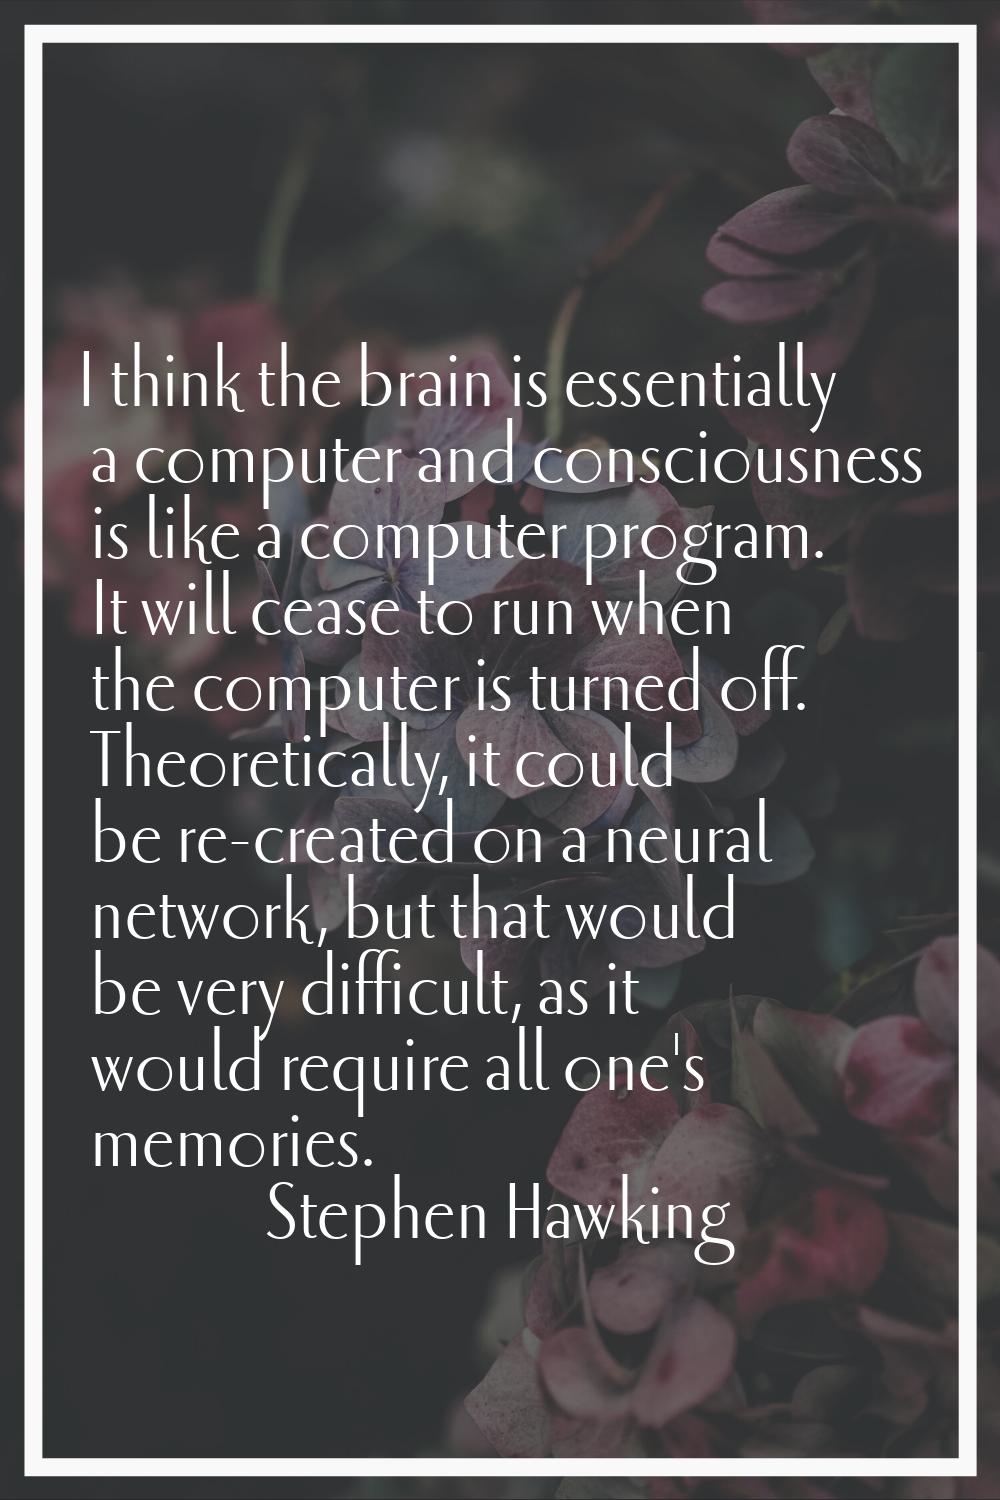 I think the brain is essentially a computer and consciousness is like a computer program. It will c